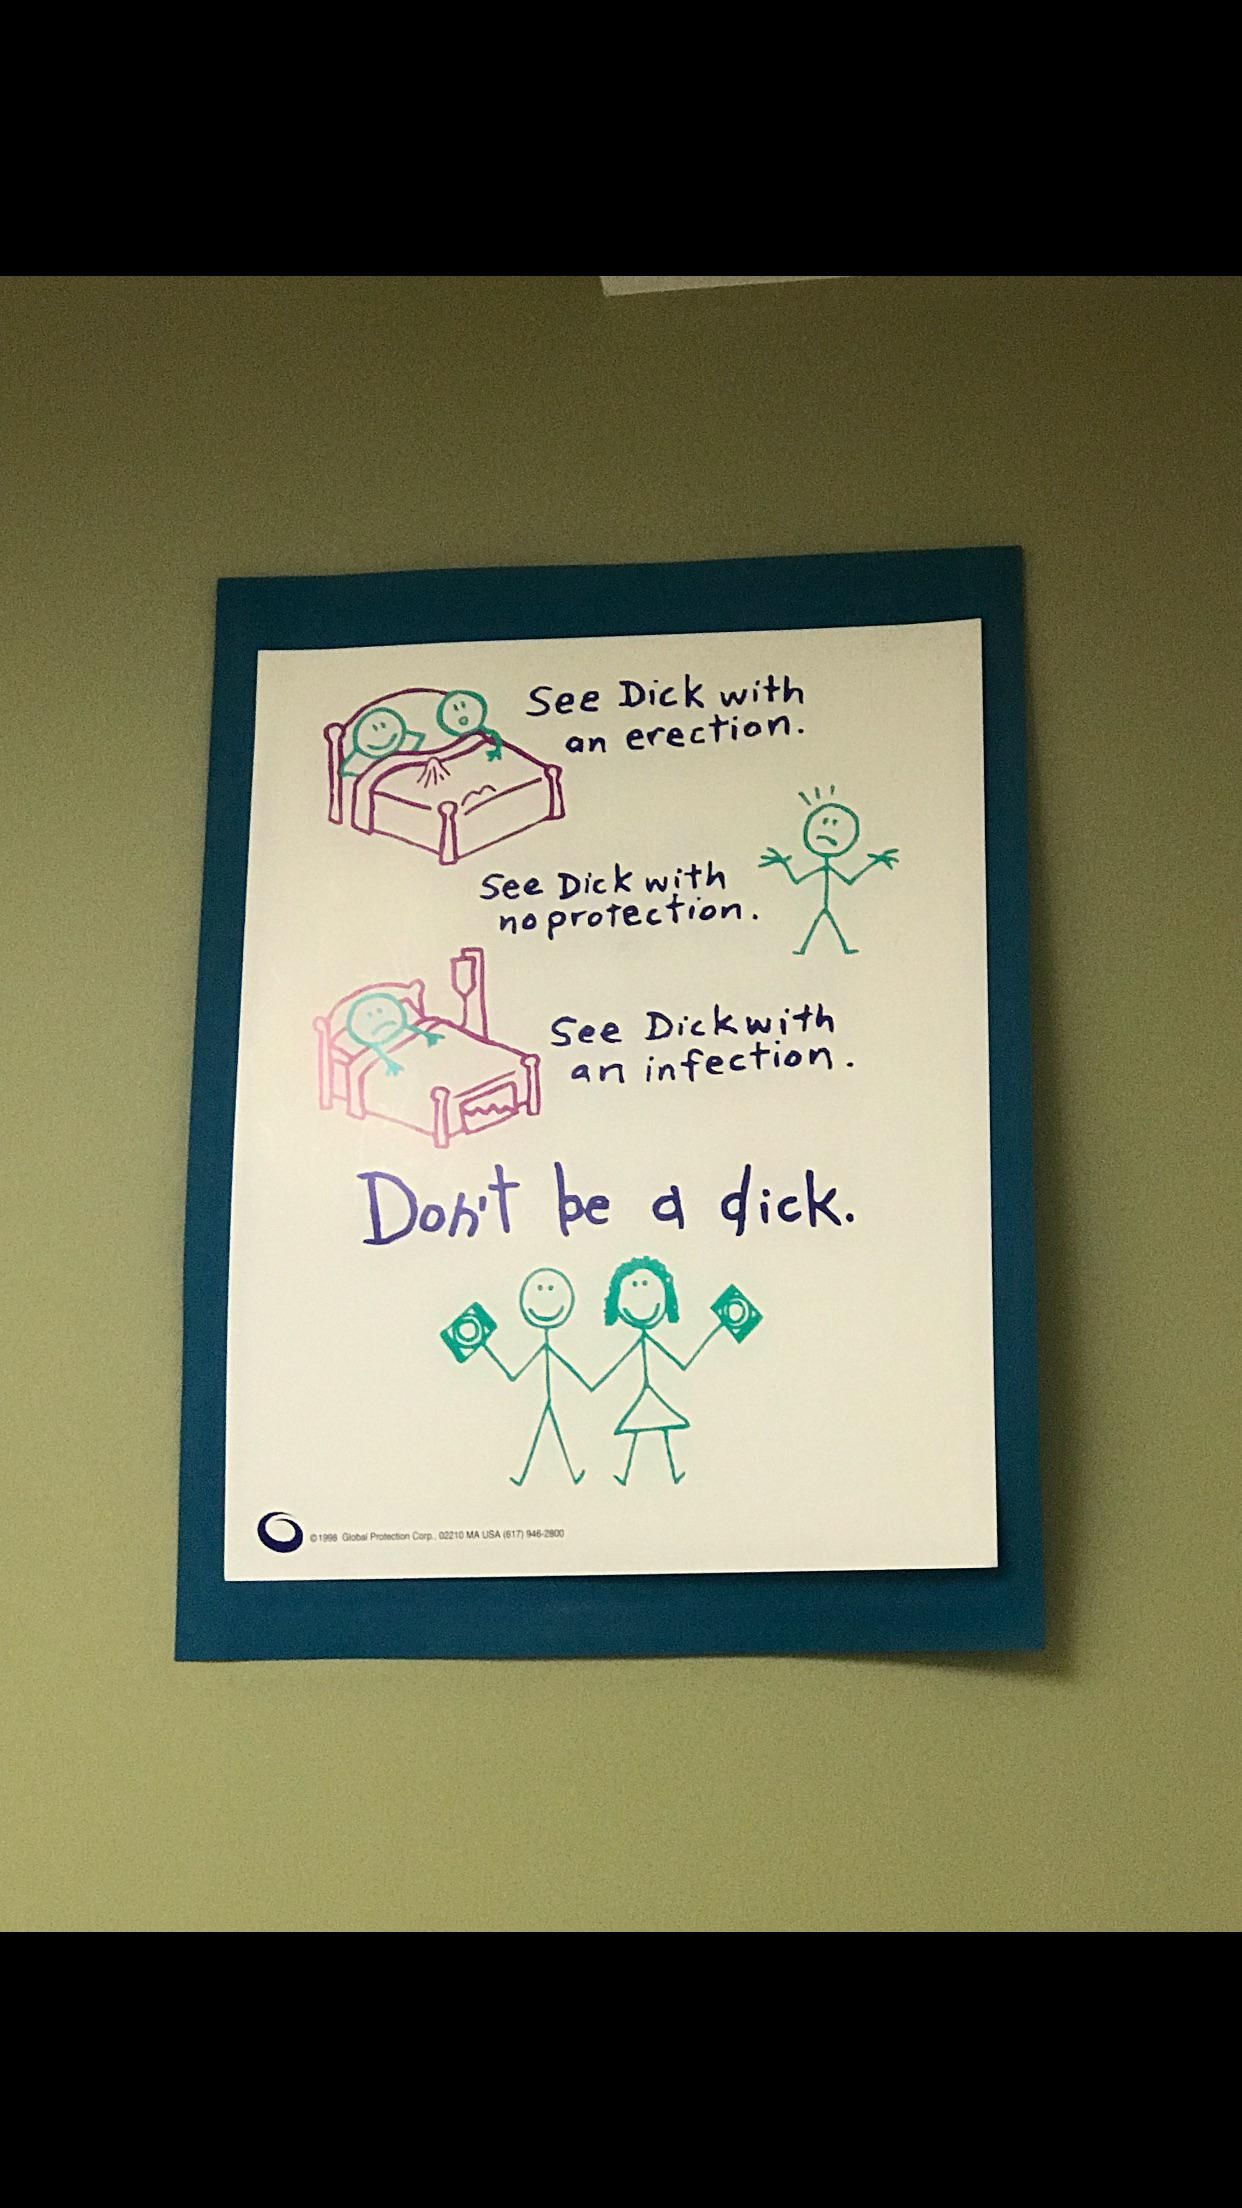 My girlfriend saw this at her university’s health center